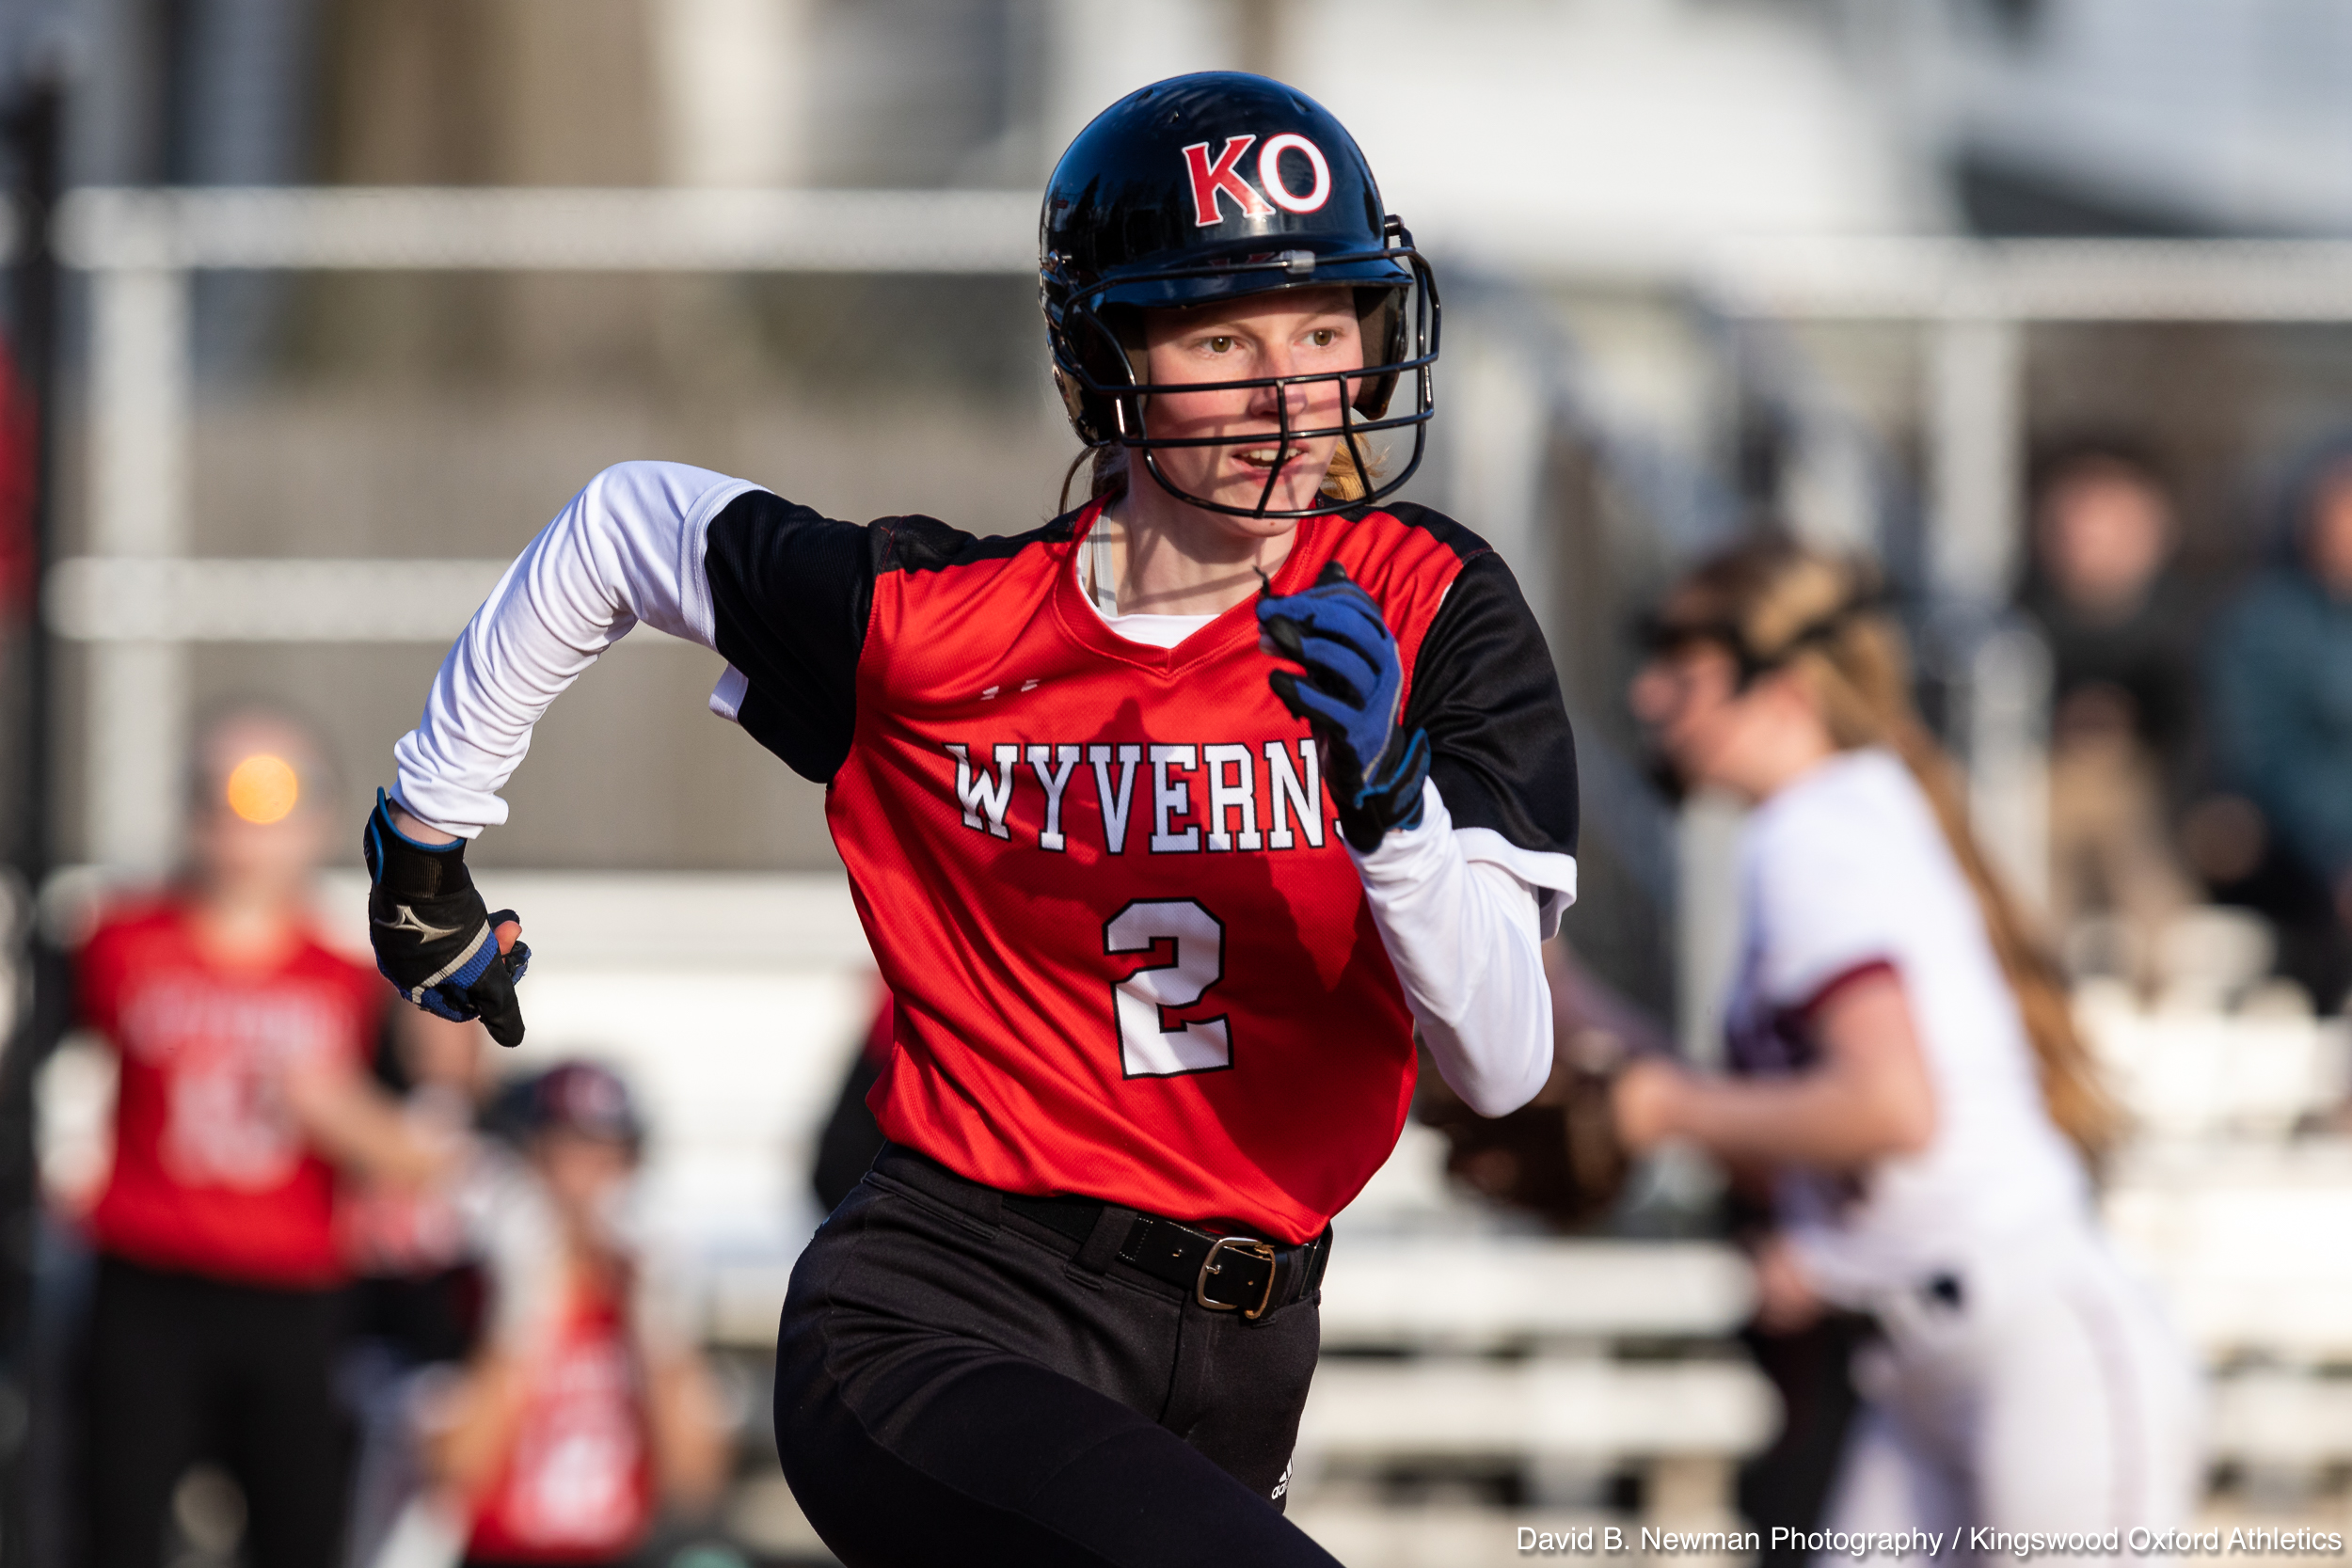 Girls play competitive sports and softball at Kingswood Oxford in West Hartford